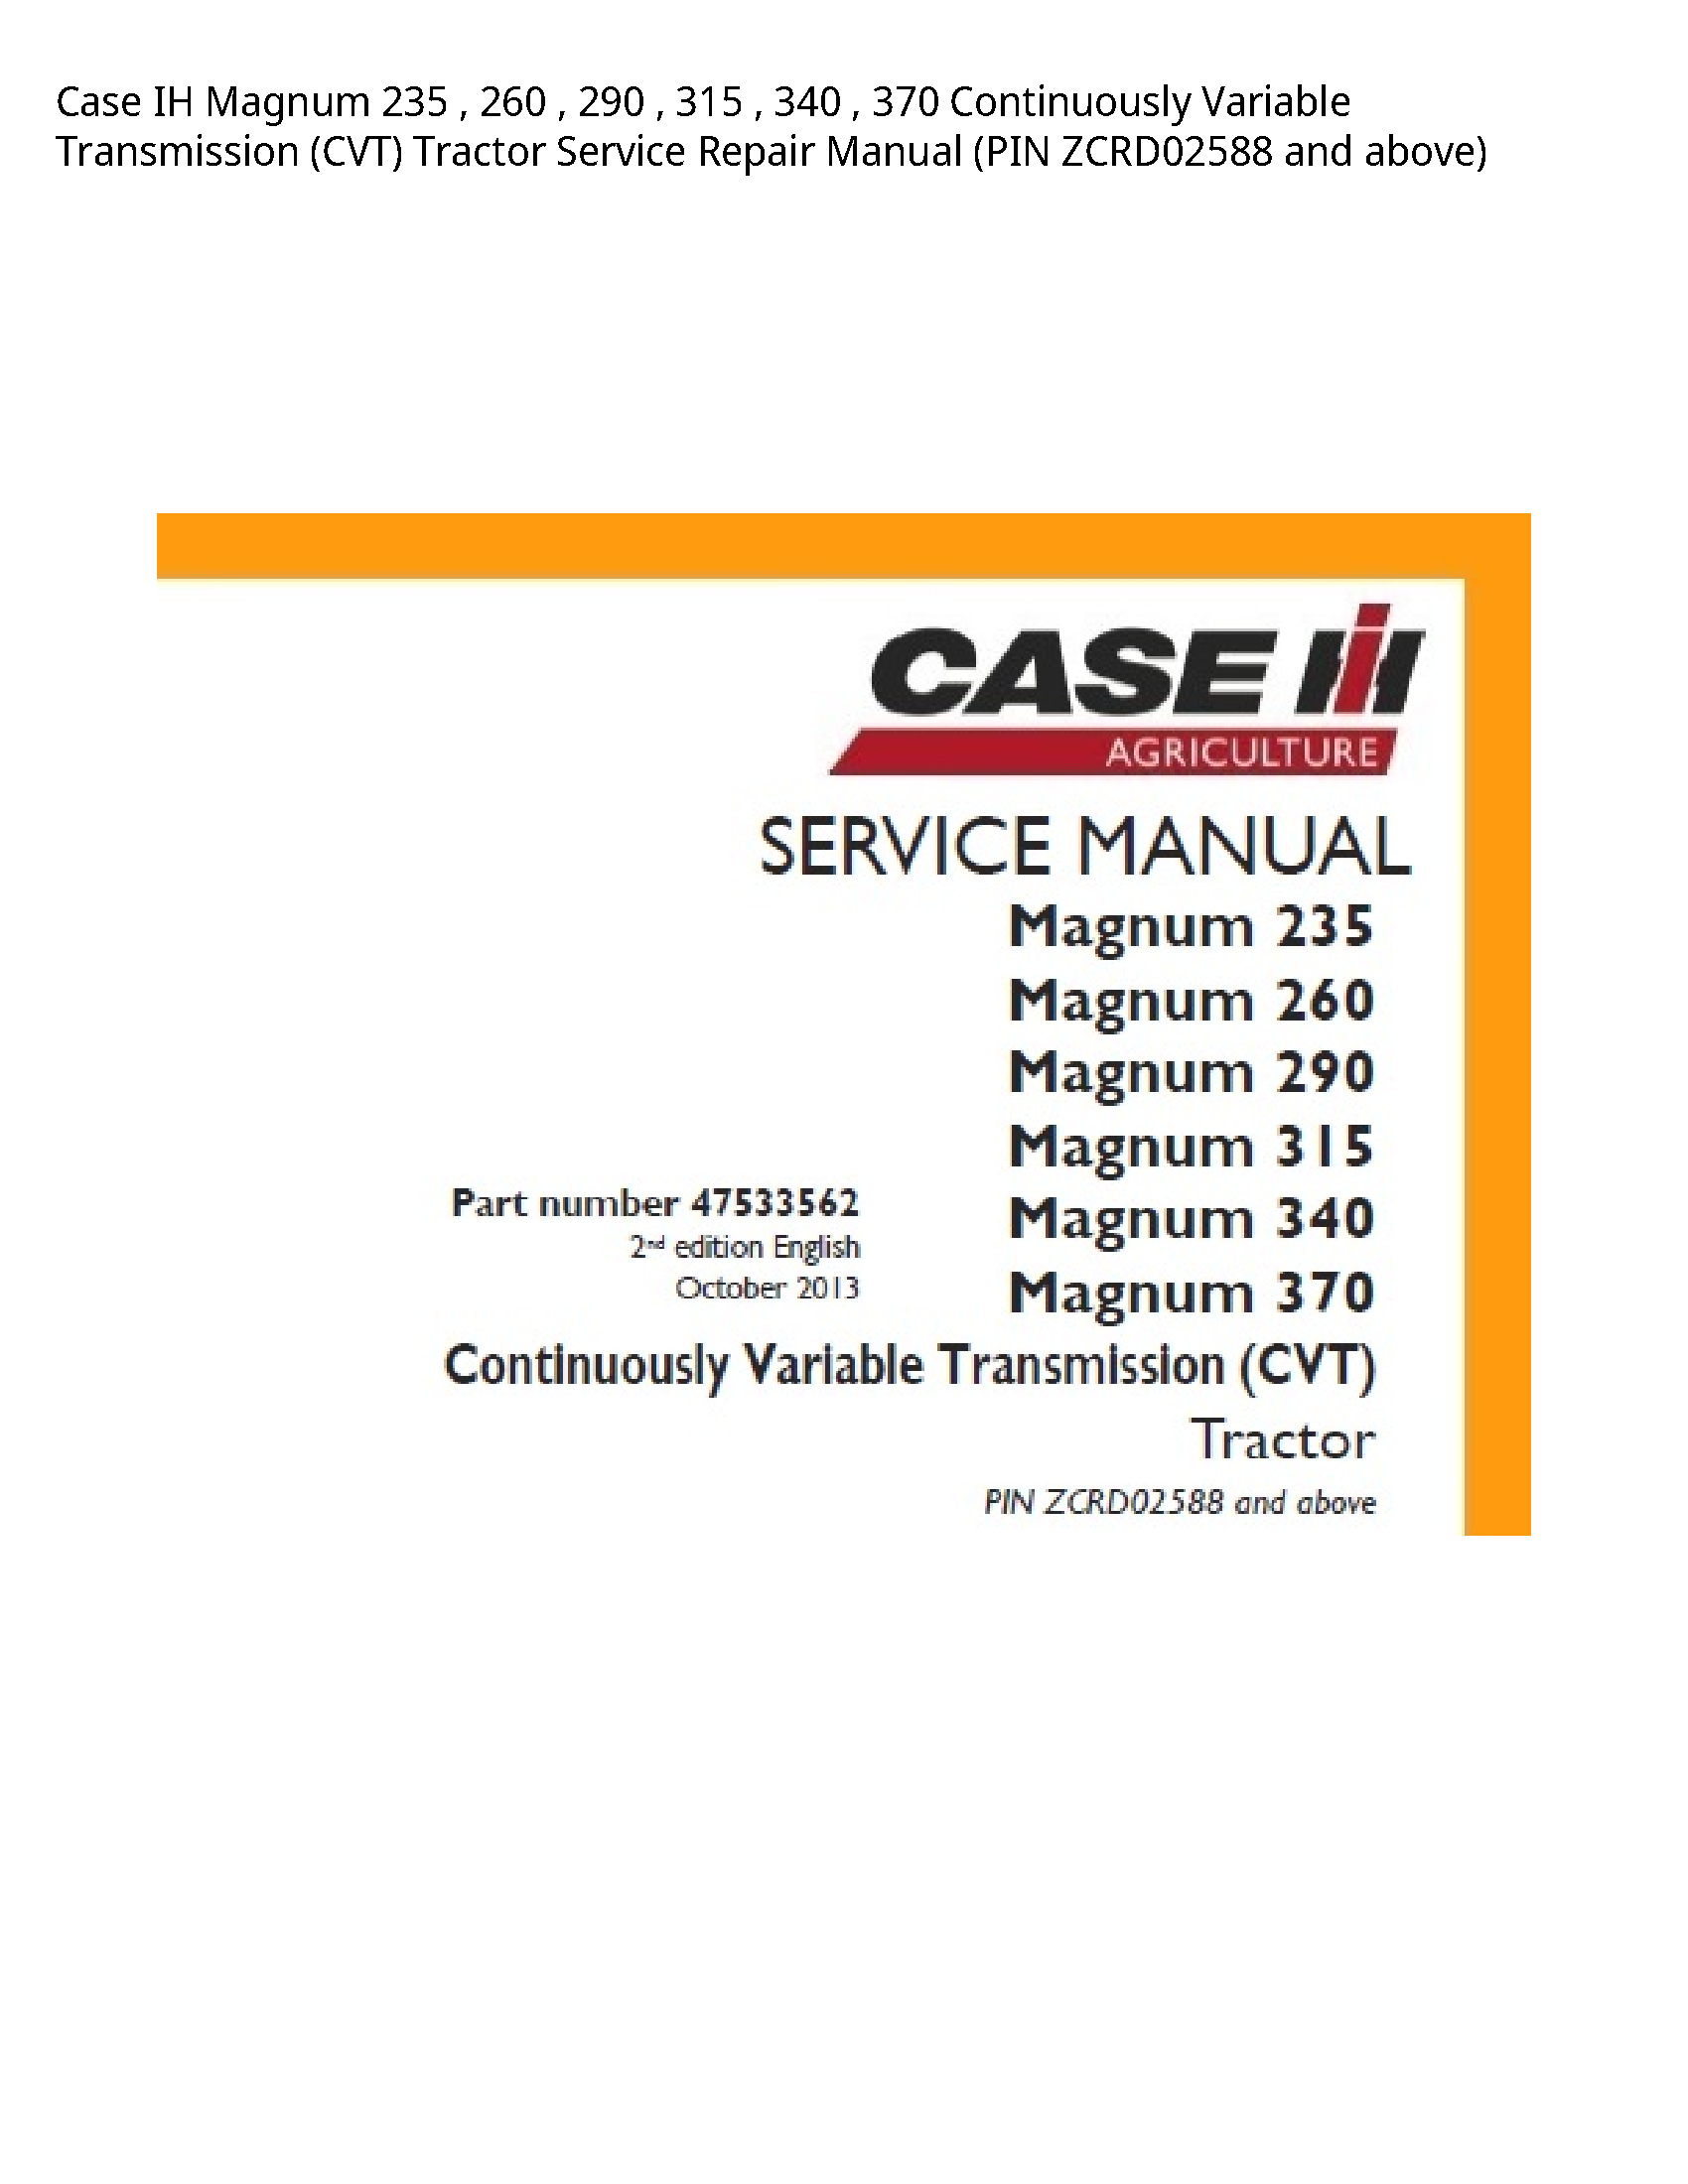 Case/Case IH 235 IH Magnum Continuously Variable Transmission (CVT) Tractor manual